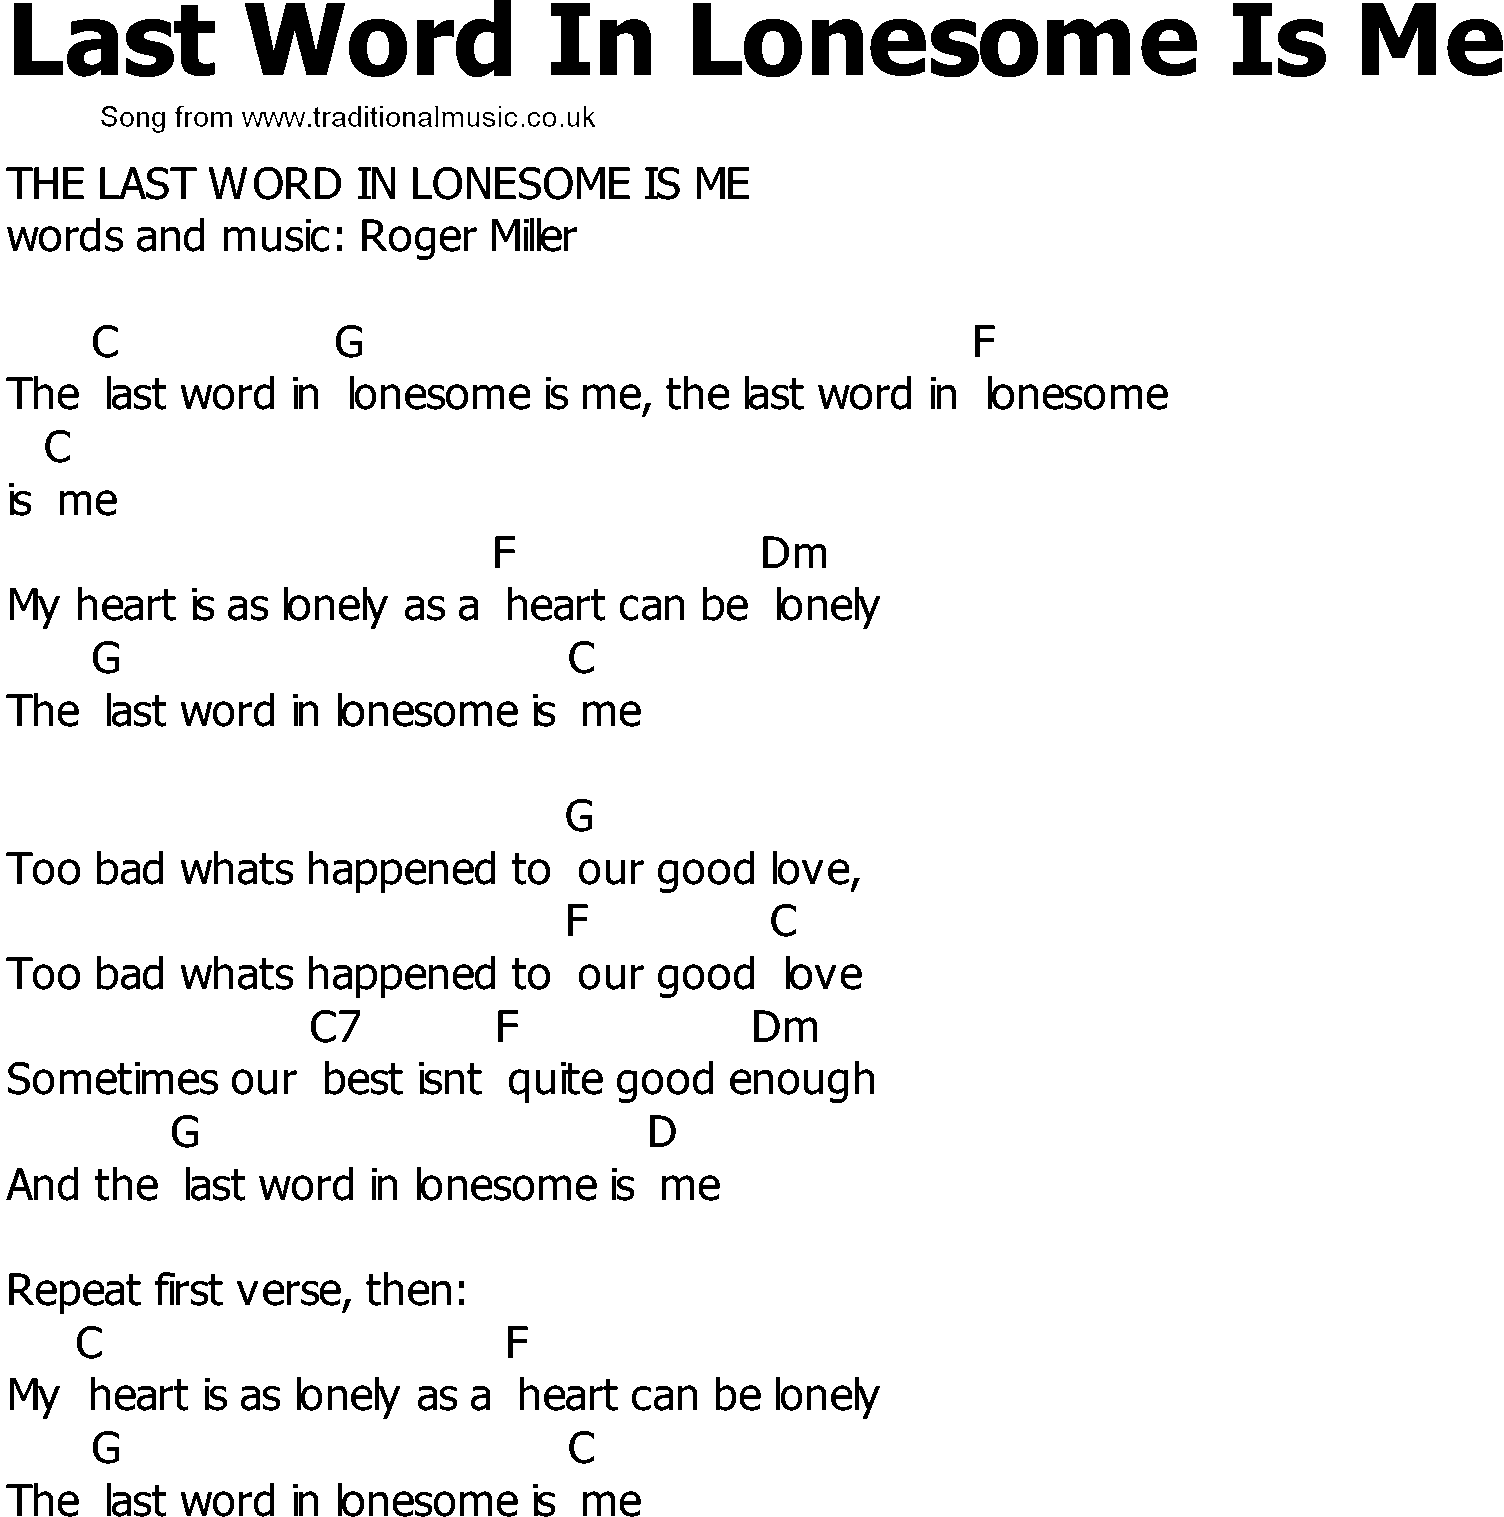 Old Country song lyrics with chords - Last Word In Lonesome Is Me